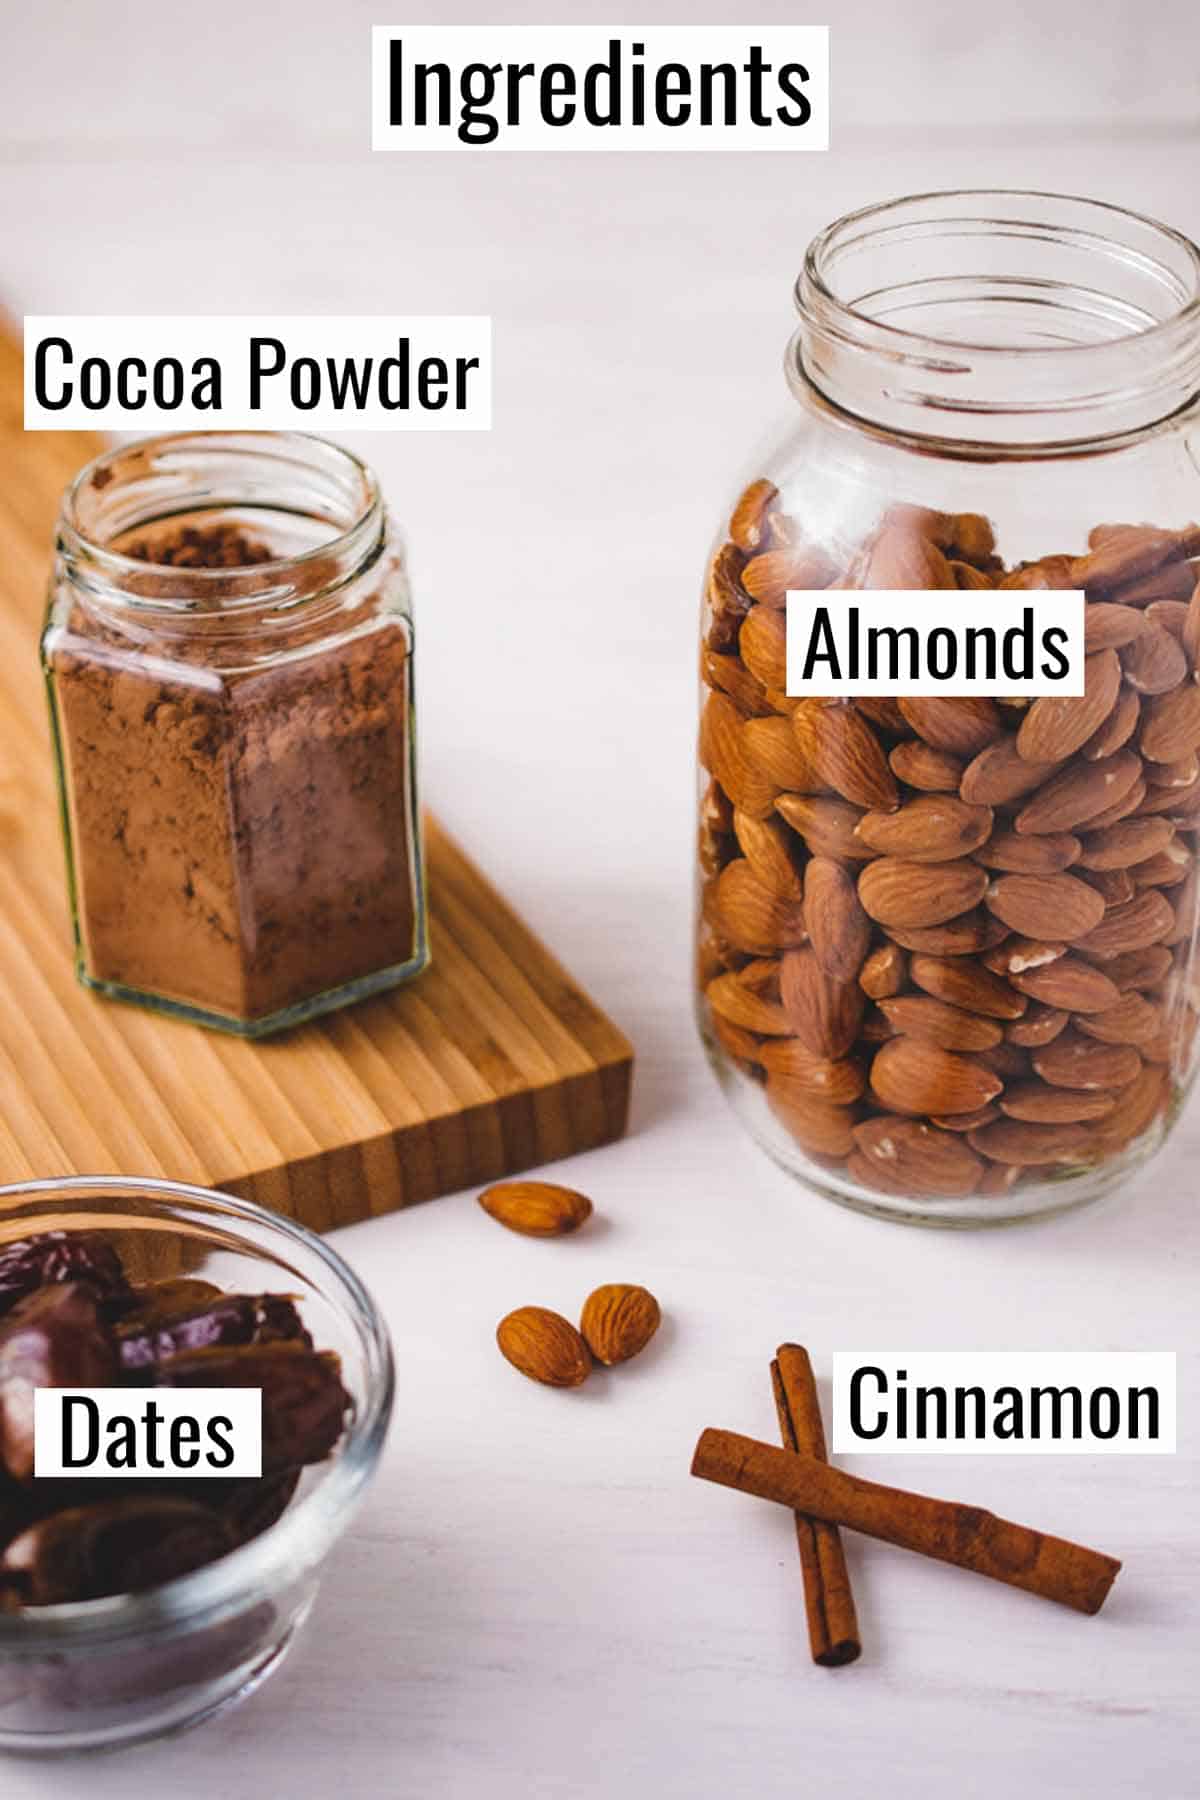 Ingredients for chocolate almond milk, including cocoa powder, almonds, cinnamon sticks, and dates.